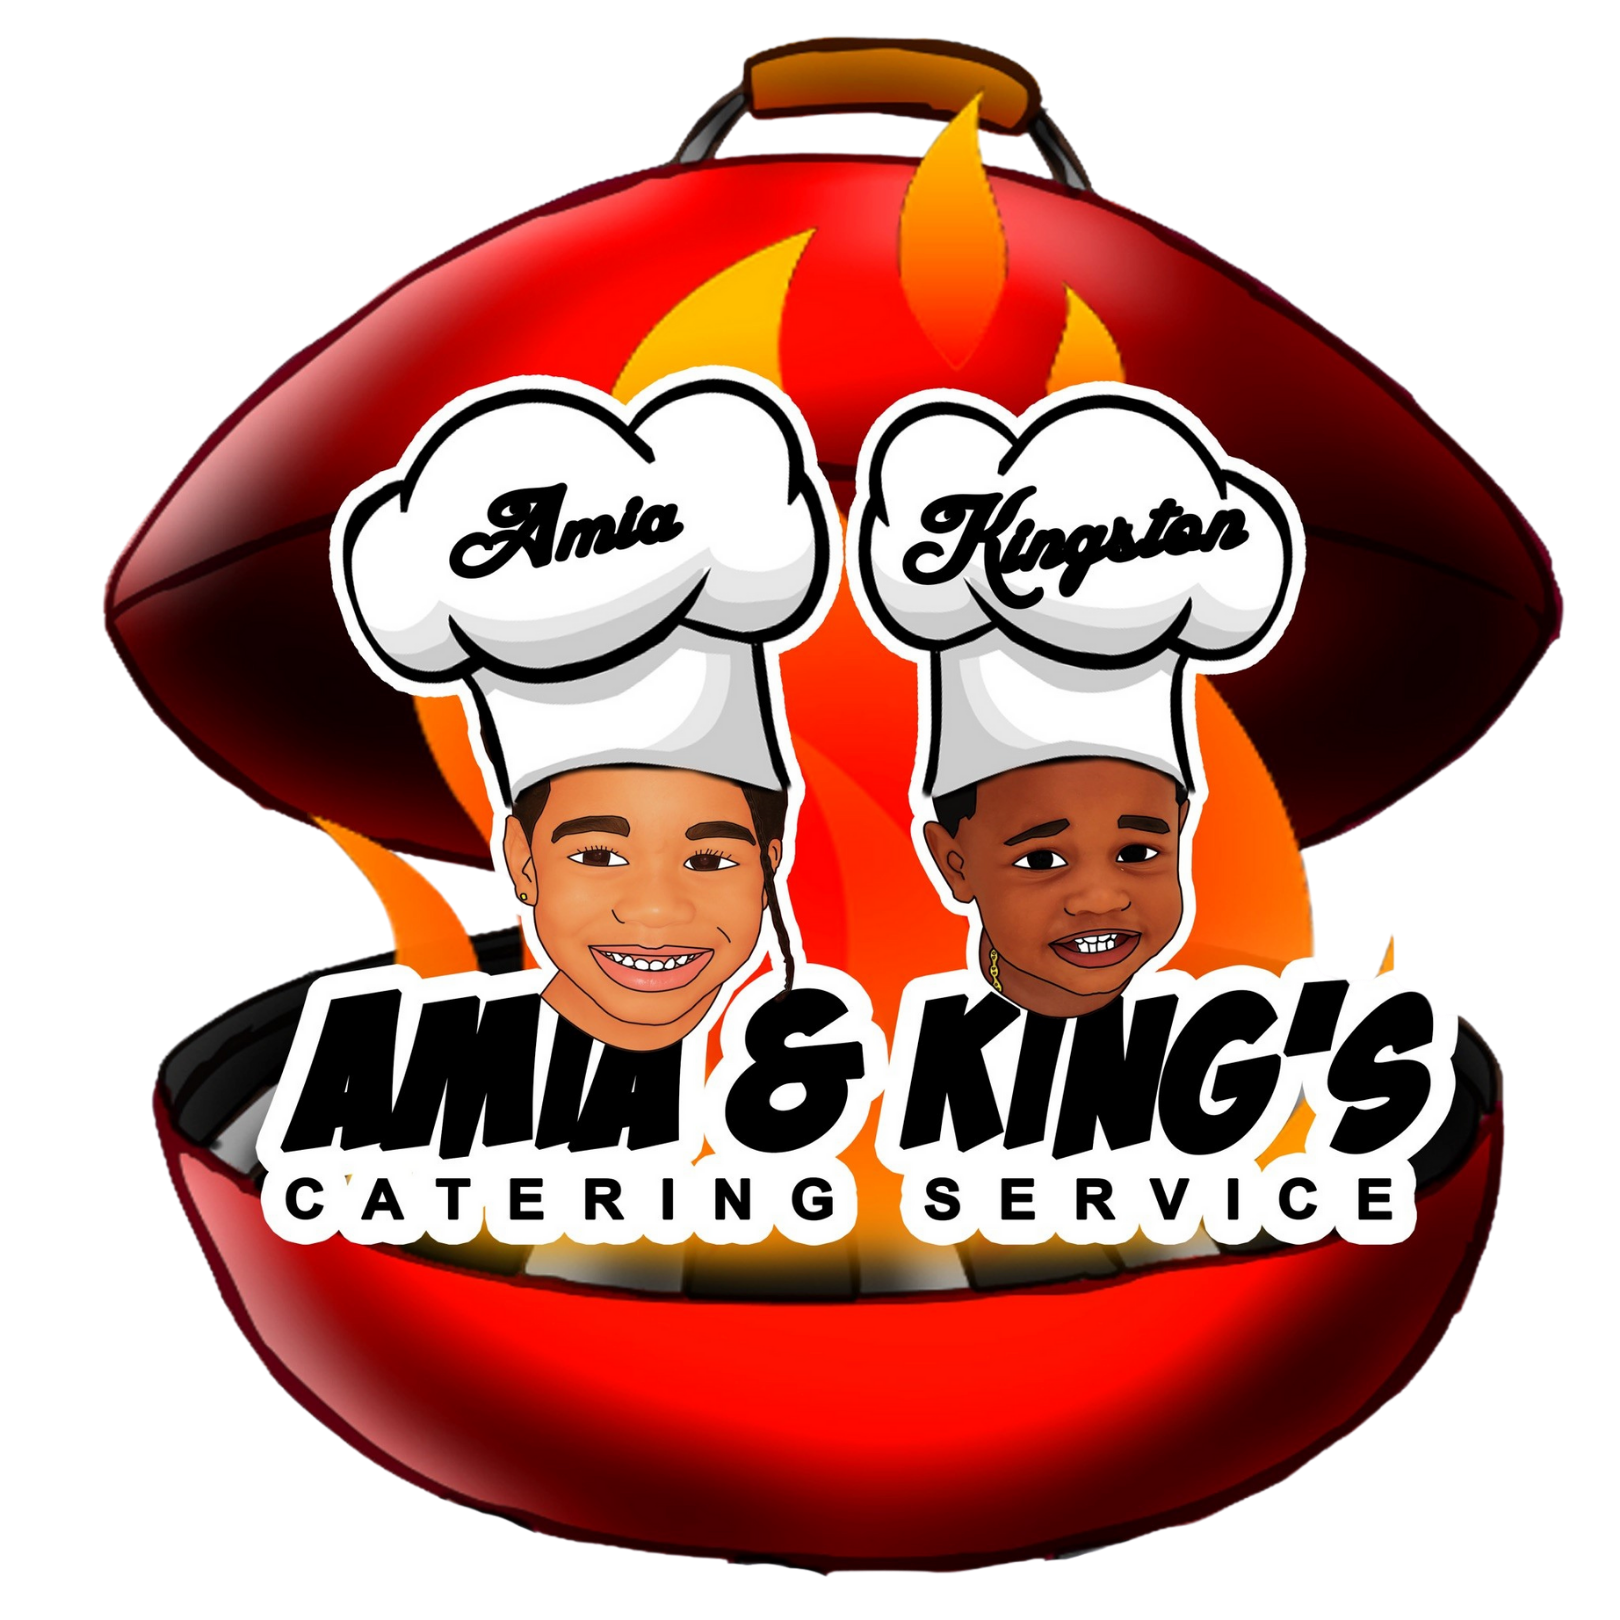 Amia King S Catering Welcome